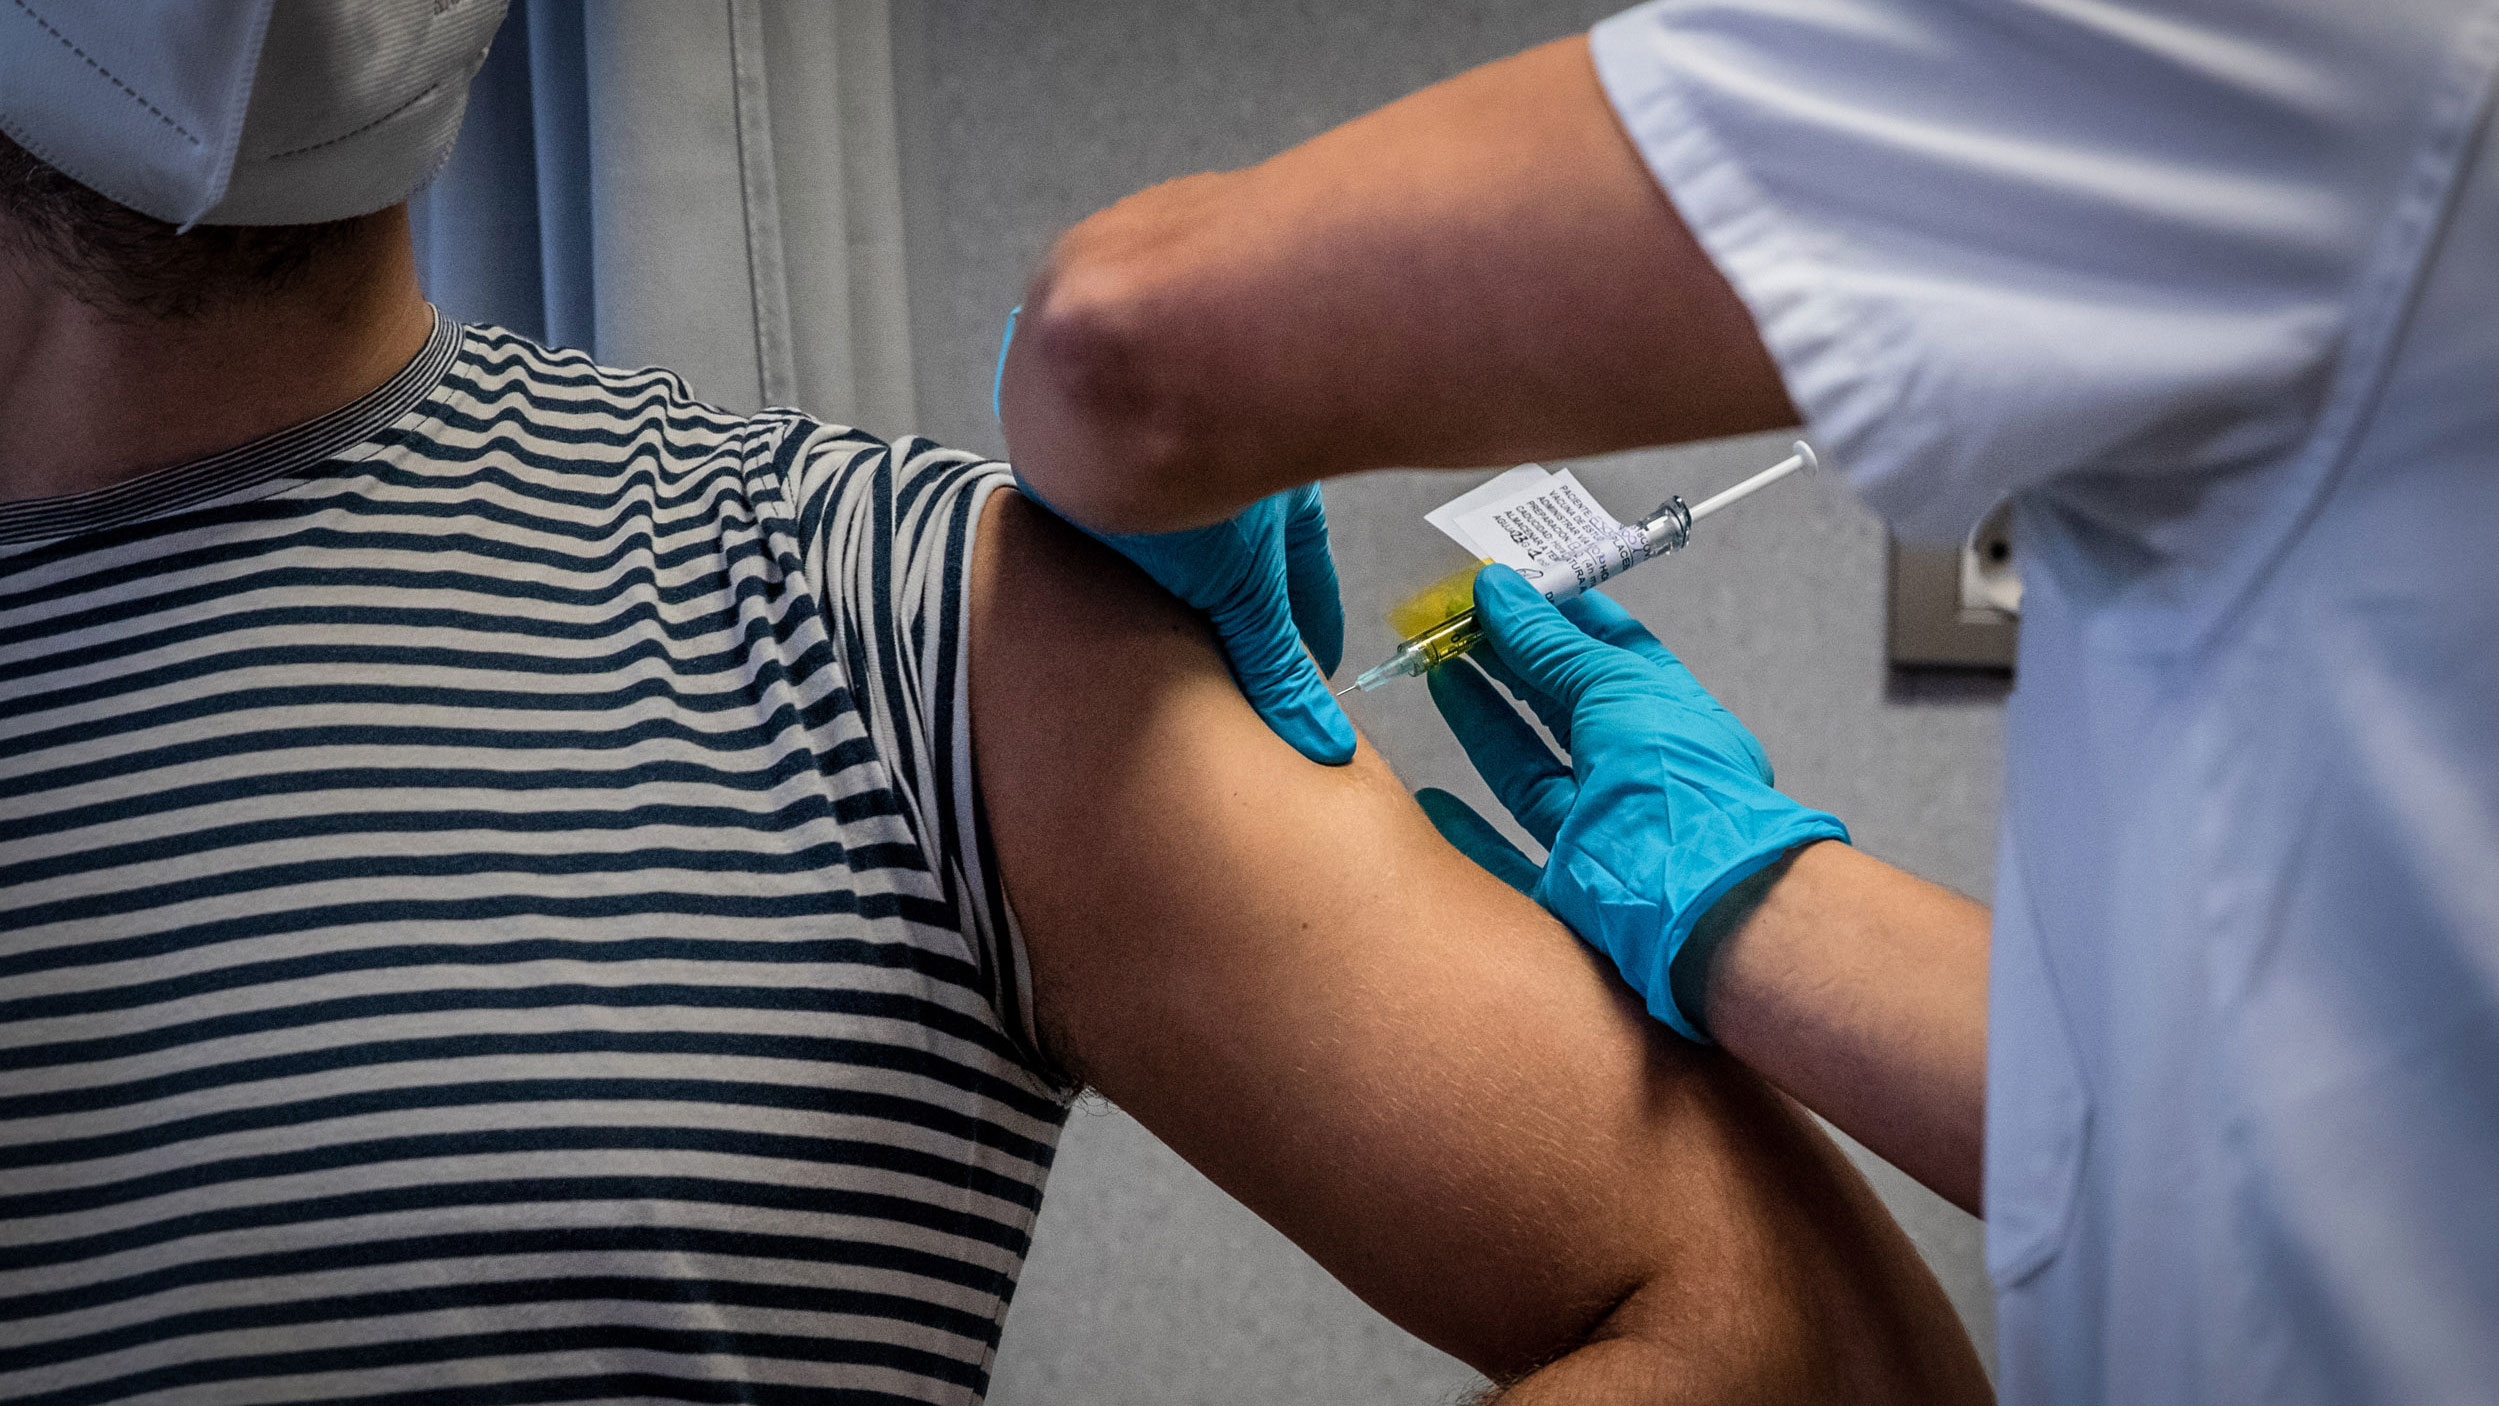 A medical worker in Barcelona, Spain, administers an injection December 17 during a trial of the Johnson & Johnson Covid-19 vaccine.